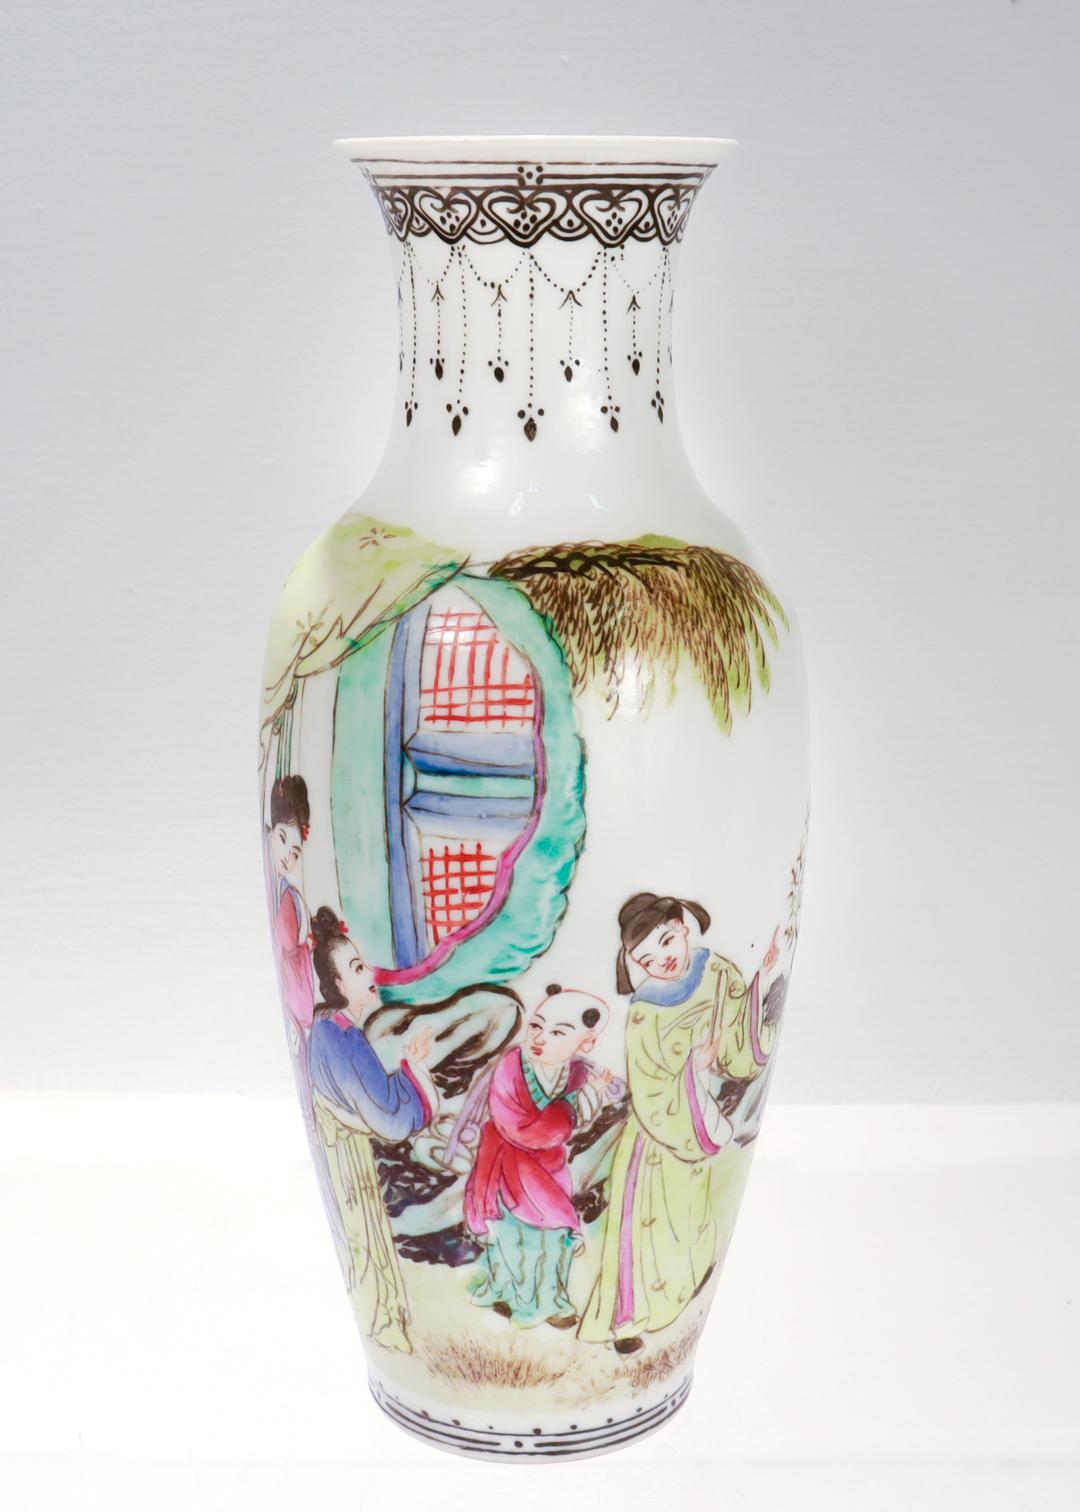 A fine Chinese Export porcelain vase.

In a baluster form.

Decorated with a painted scene of two men and two women in traditional Chinese garb. In the background are trees and a rocky outcropping in a style reminiscent of sumi-e (ink wash